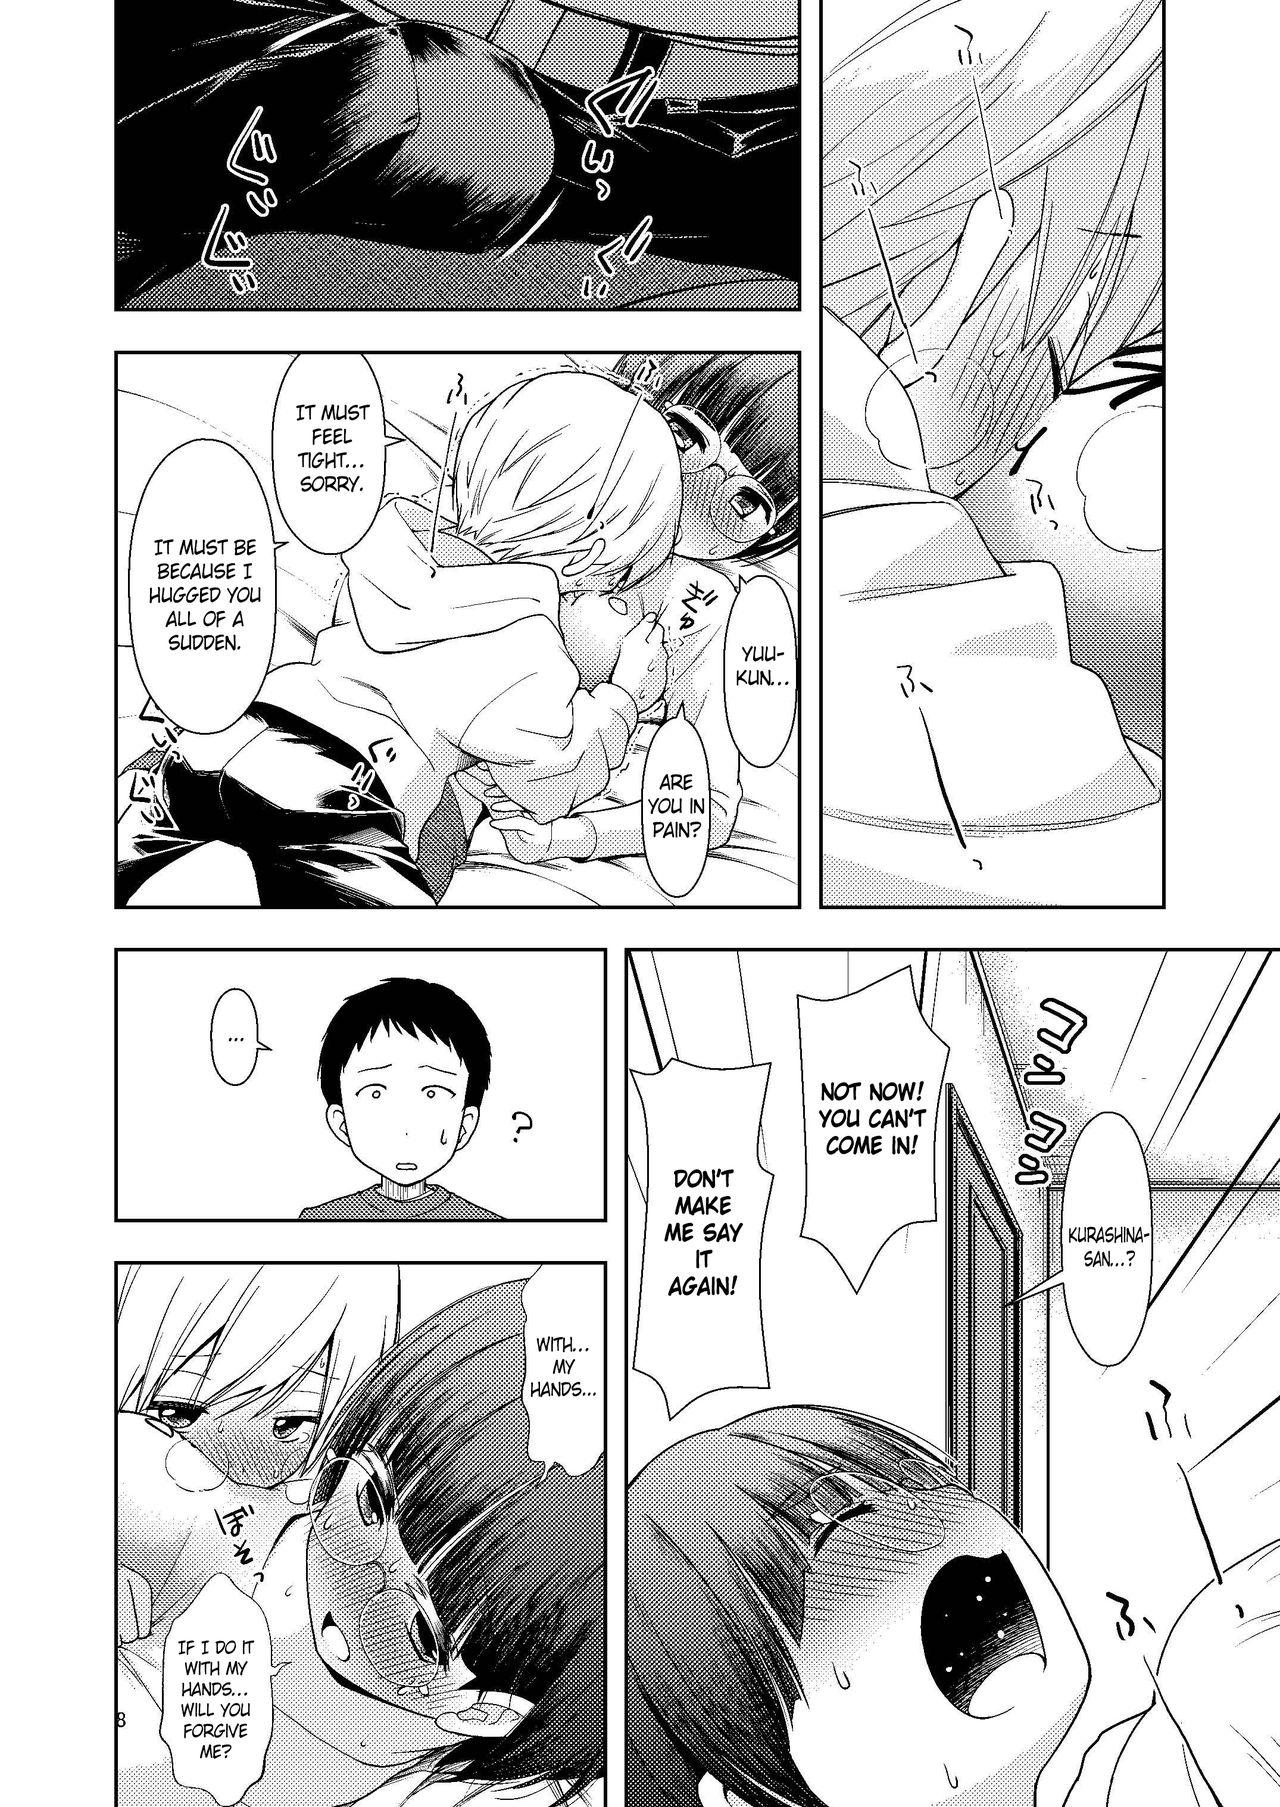 Argentina Onii-chan no Kanojo | My Brother's Sweetheart - Original Edging - Page 10